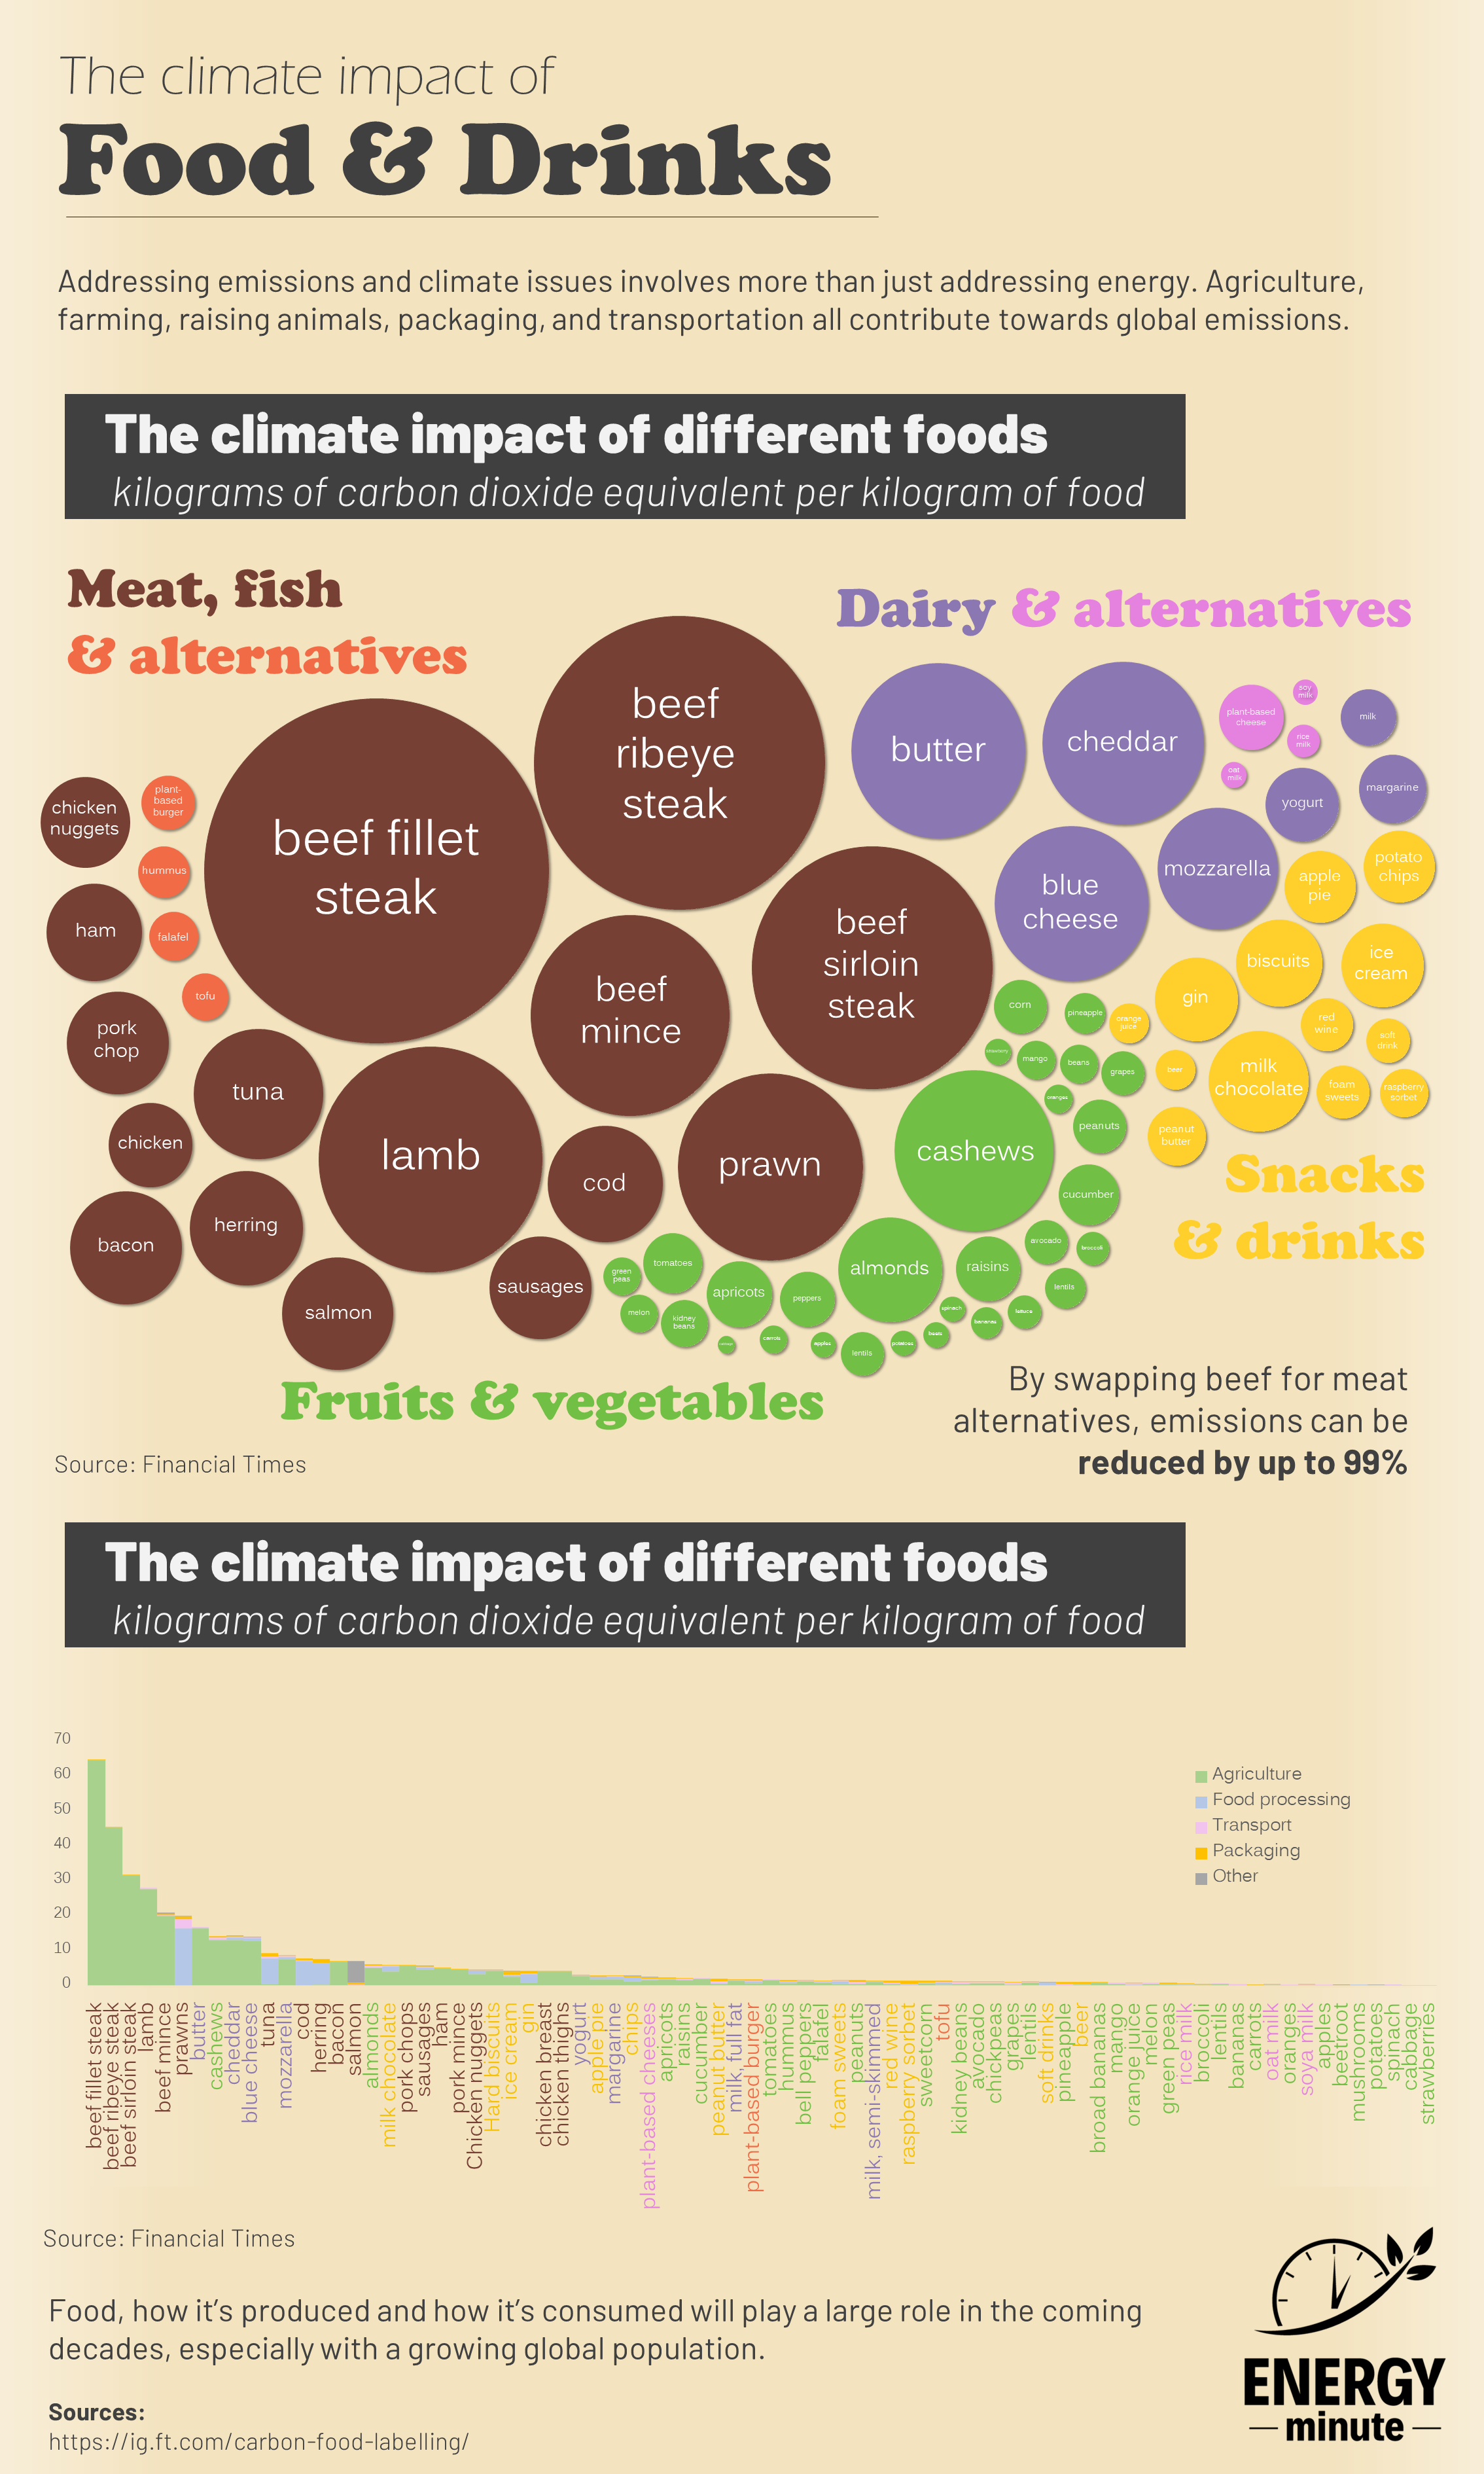 The climate impact of different food and drinks